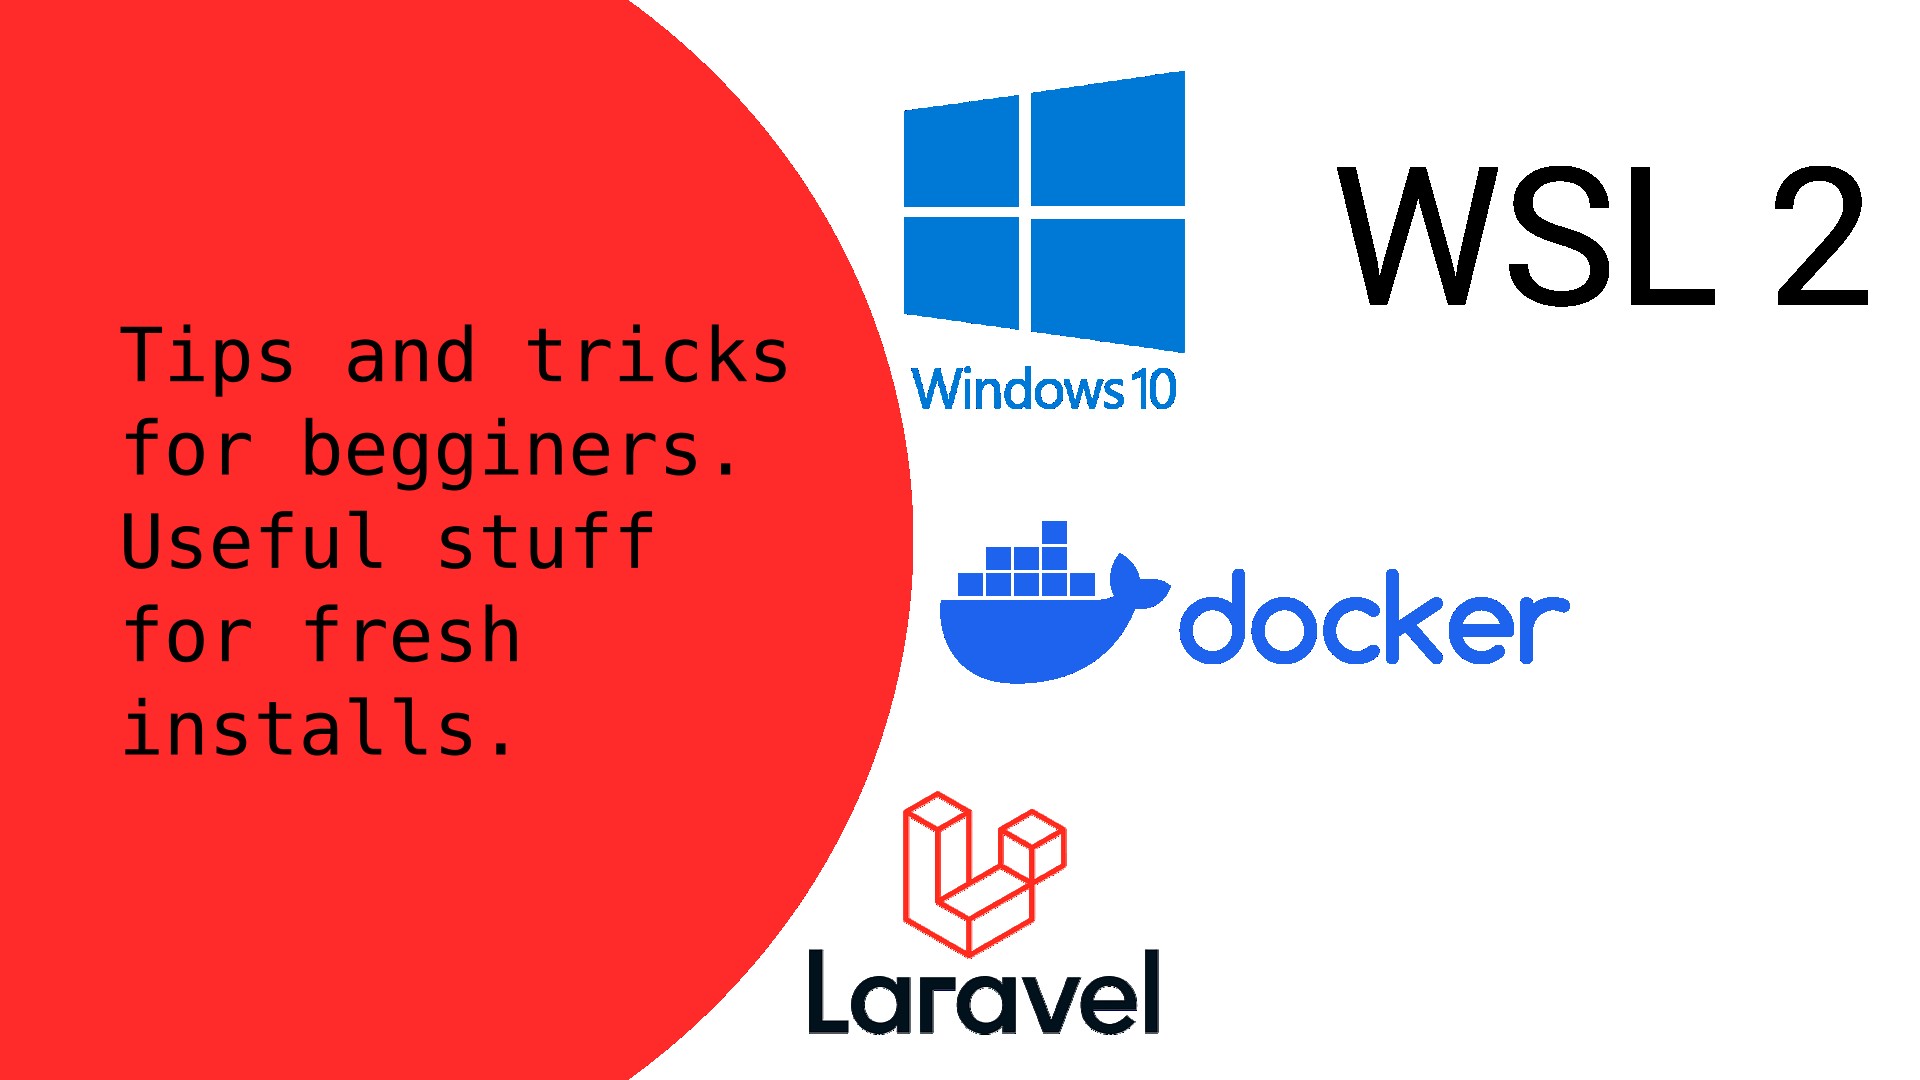 Here is what you need to know about running a Laravel 10.x Docker container on Windows 10 WSL2.